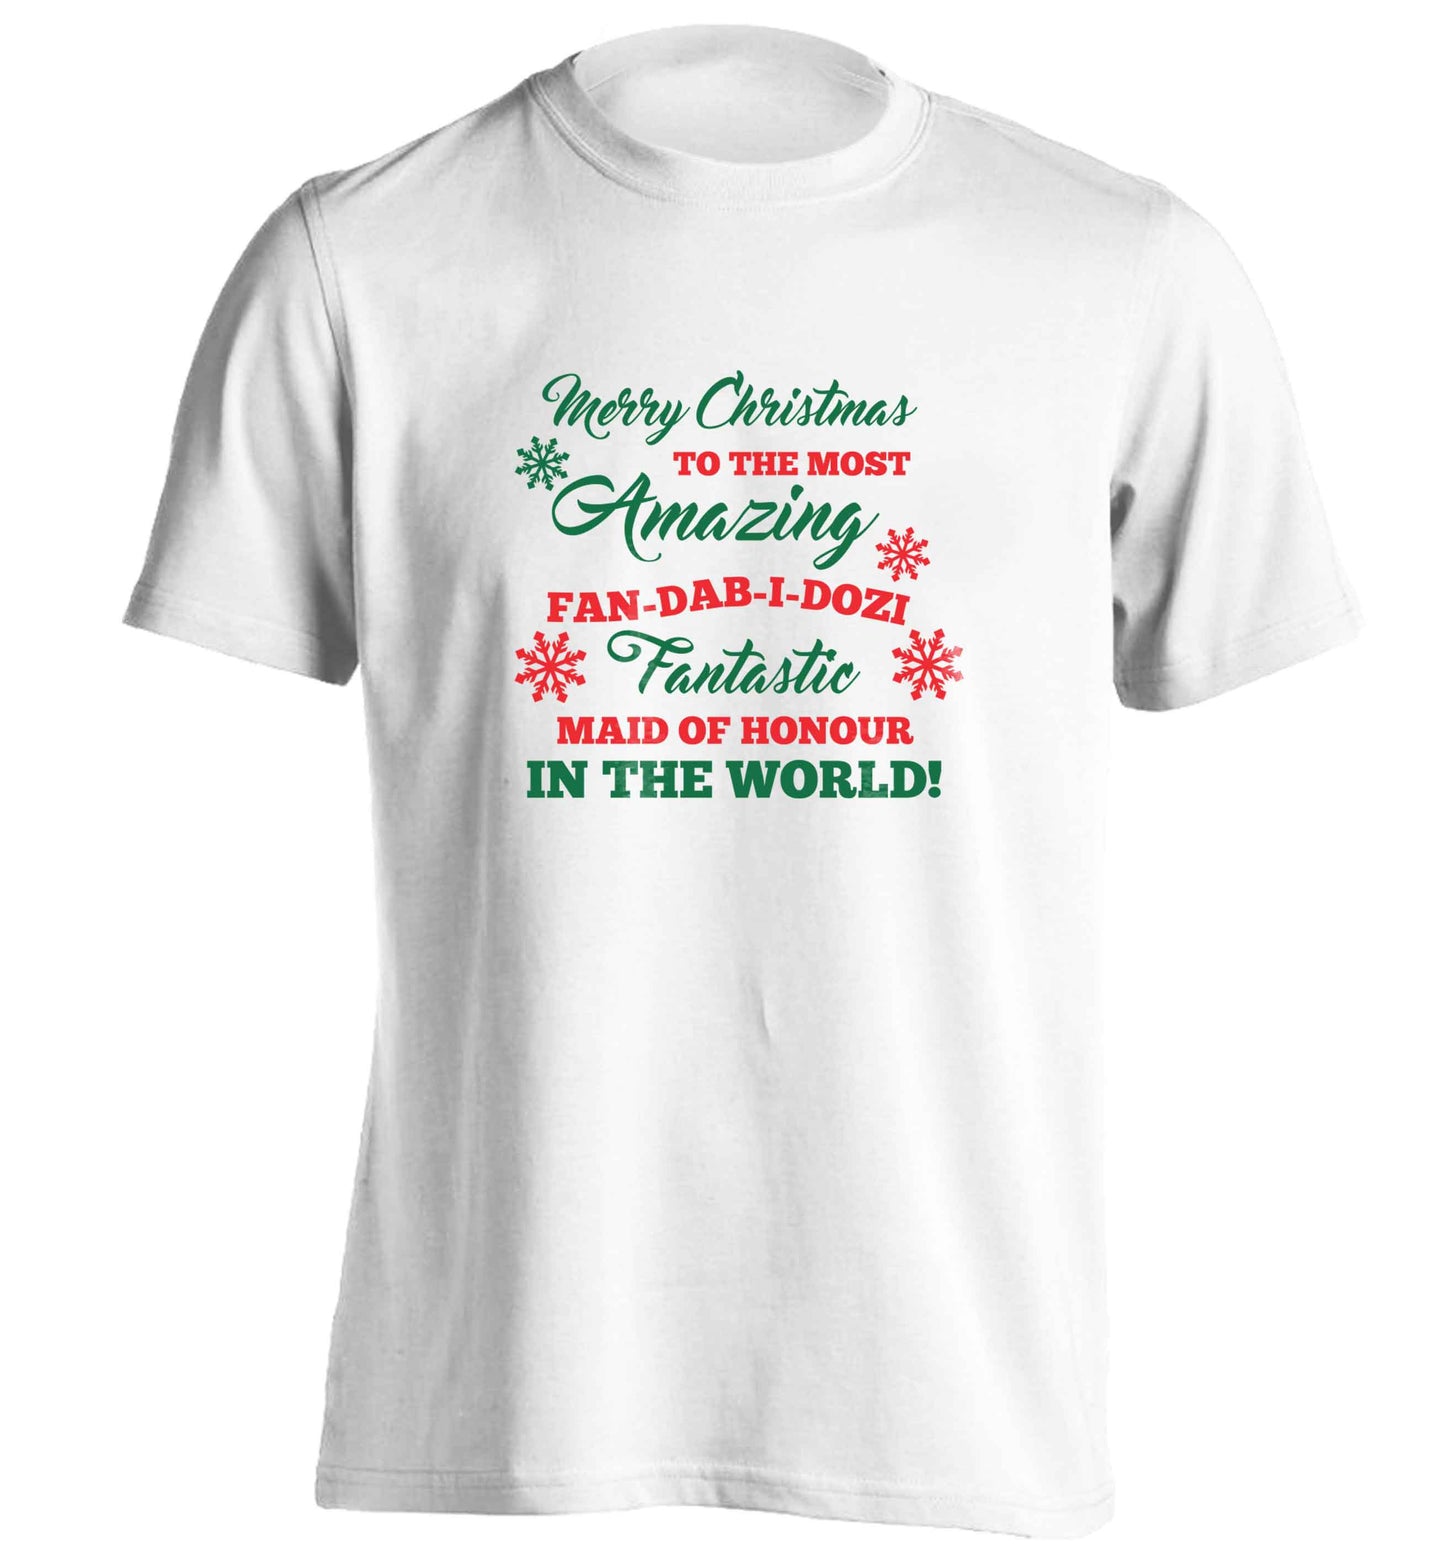 Merry Christmas to the most amazing maid of honour in the world! adults unisex white Tshirt 2XL